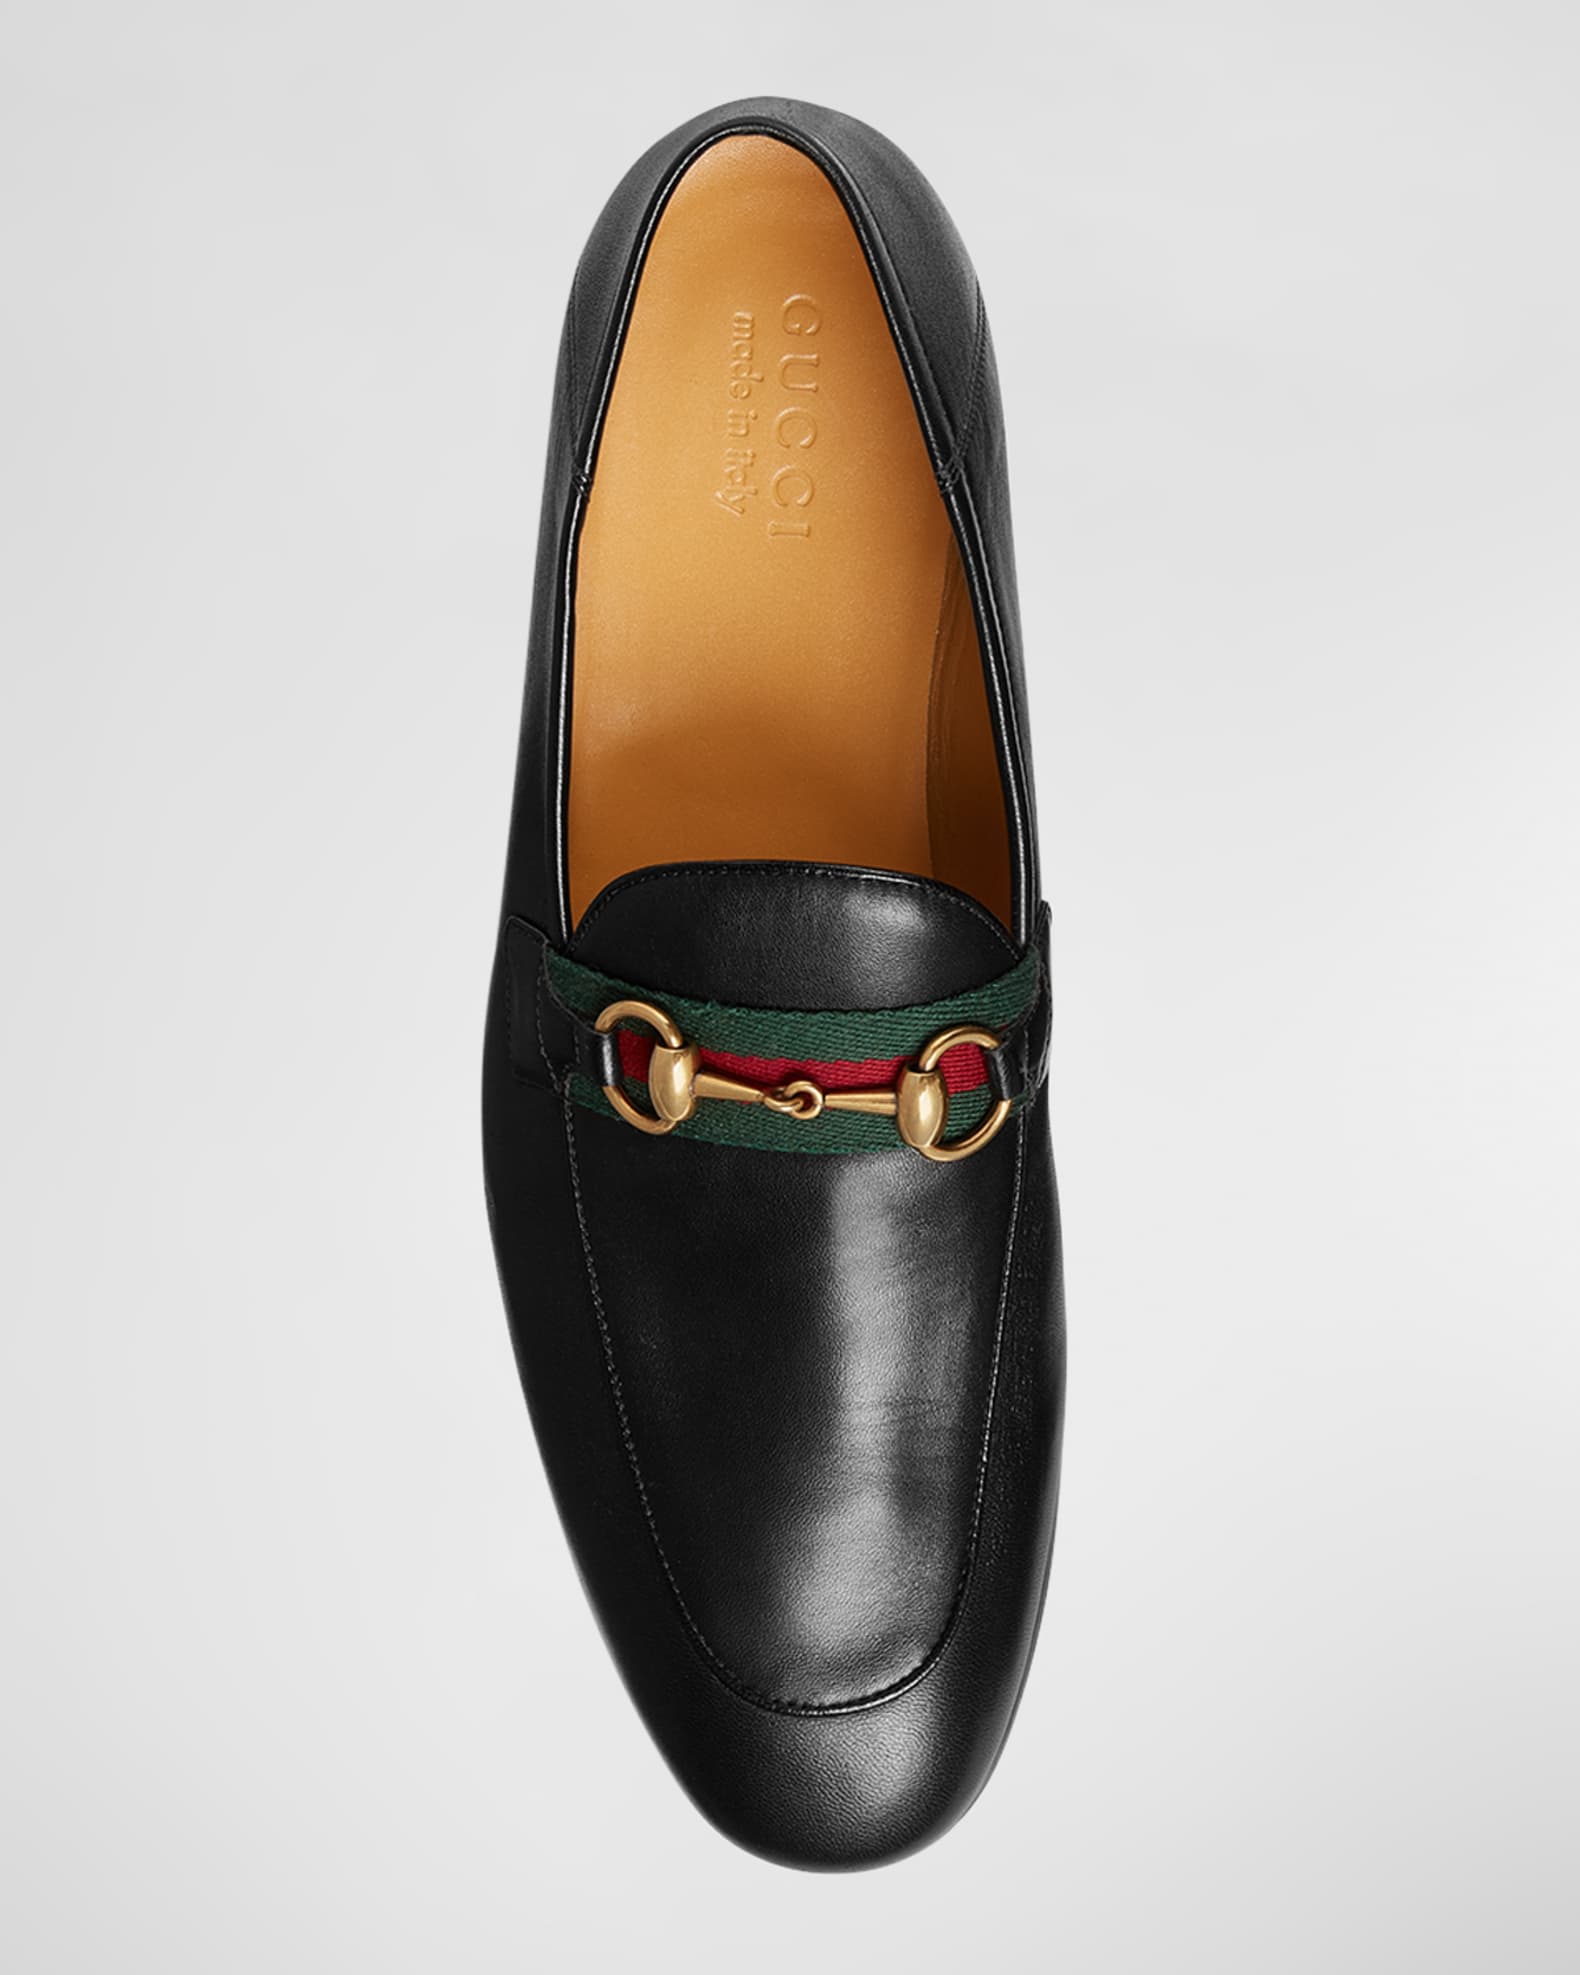 Gucci Men's Brixton Web Leather Loafers | Neiman Marcus